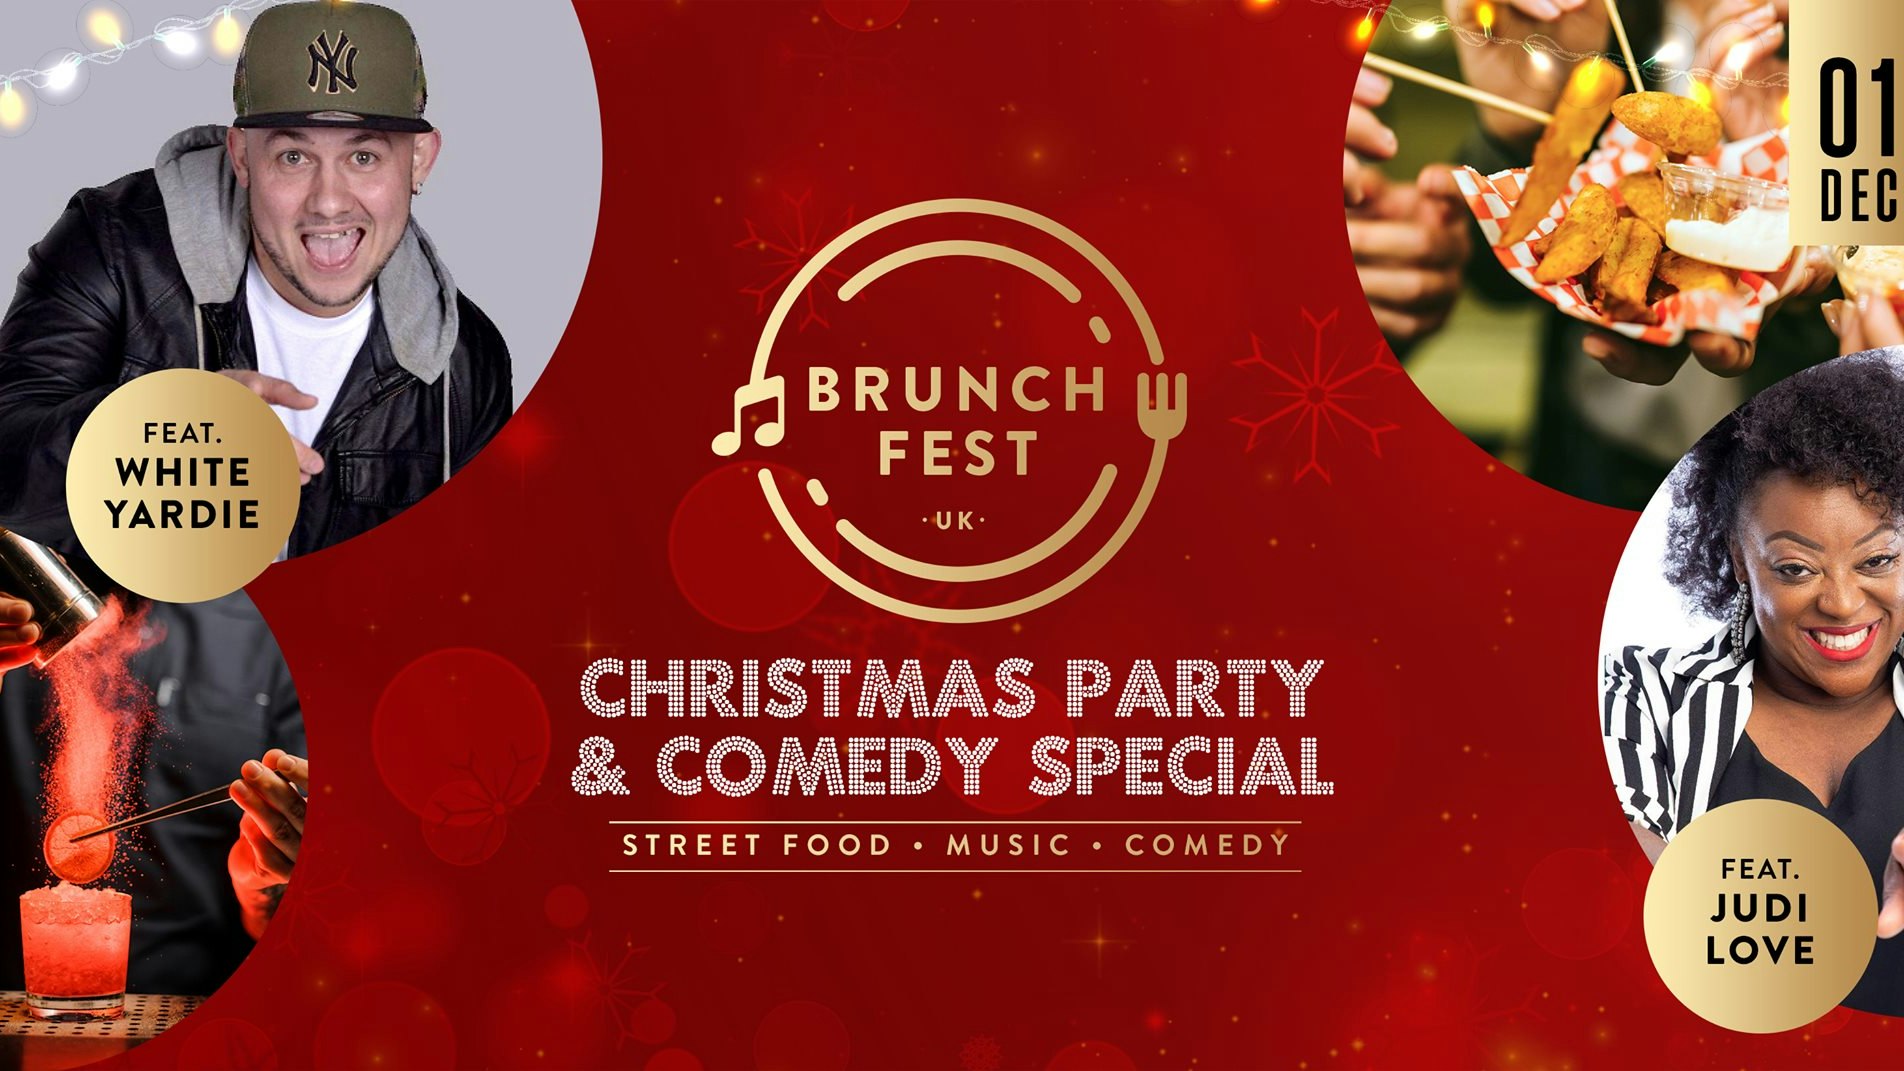 Brunchfest UK Christmas Party & Comedy Special